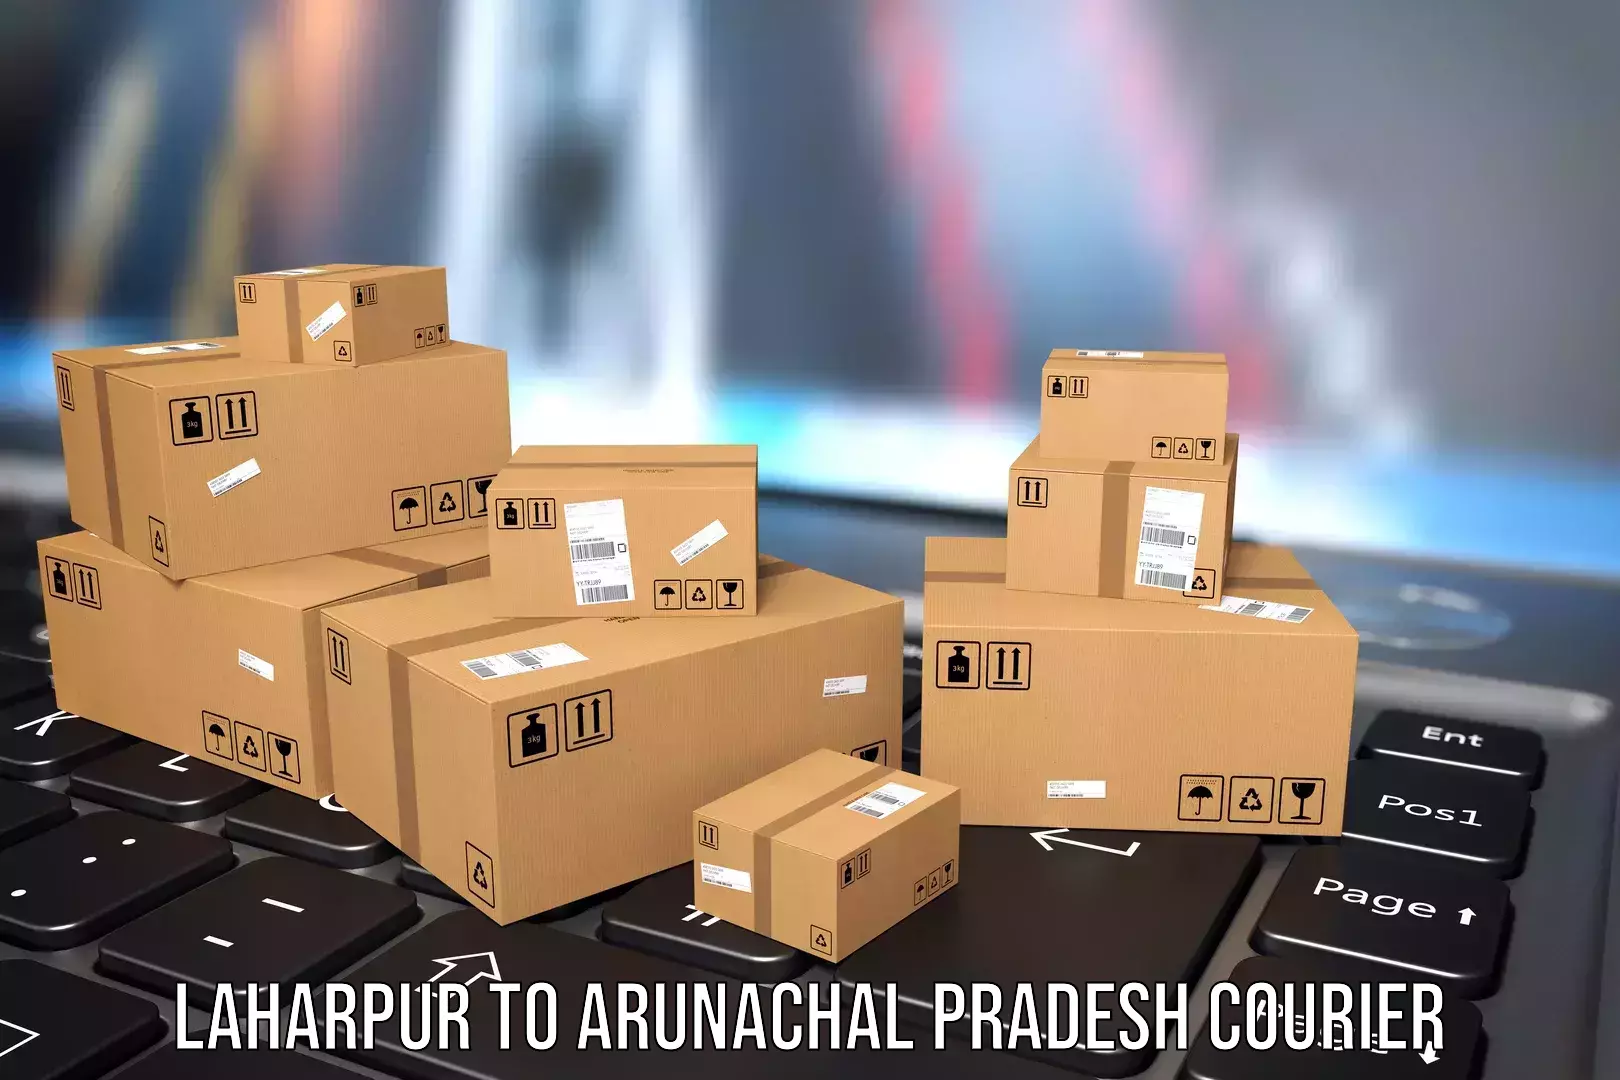 Luggage delivery providers Laharpur to Lohit